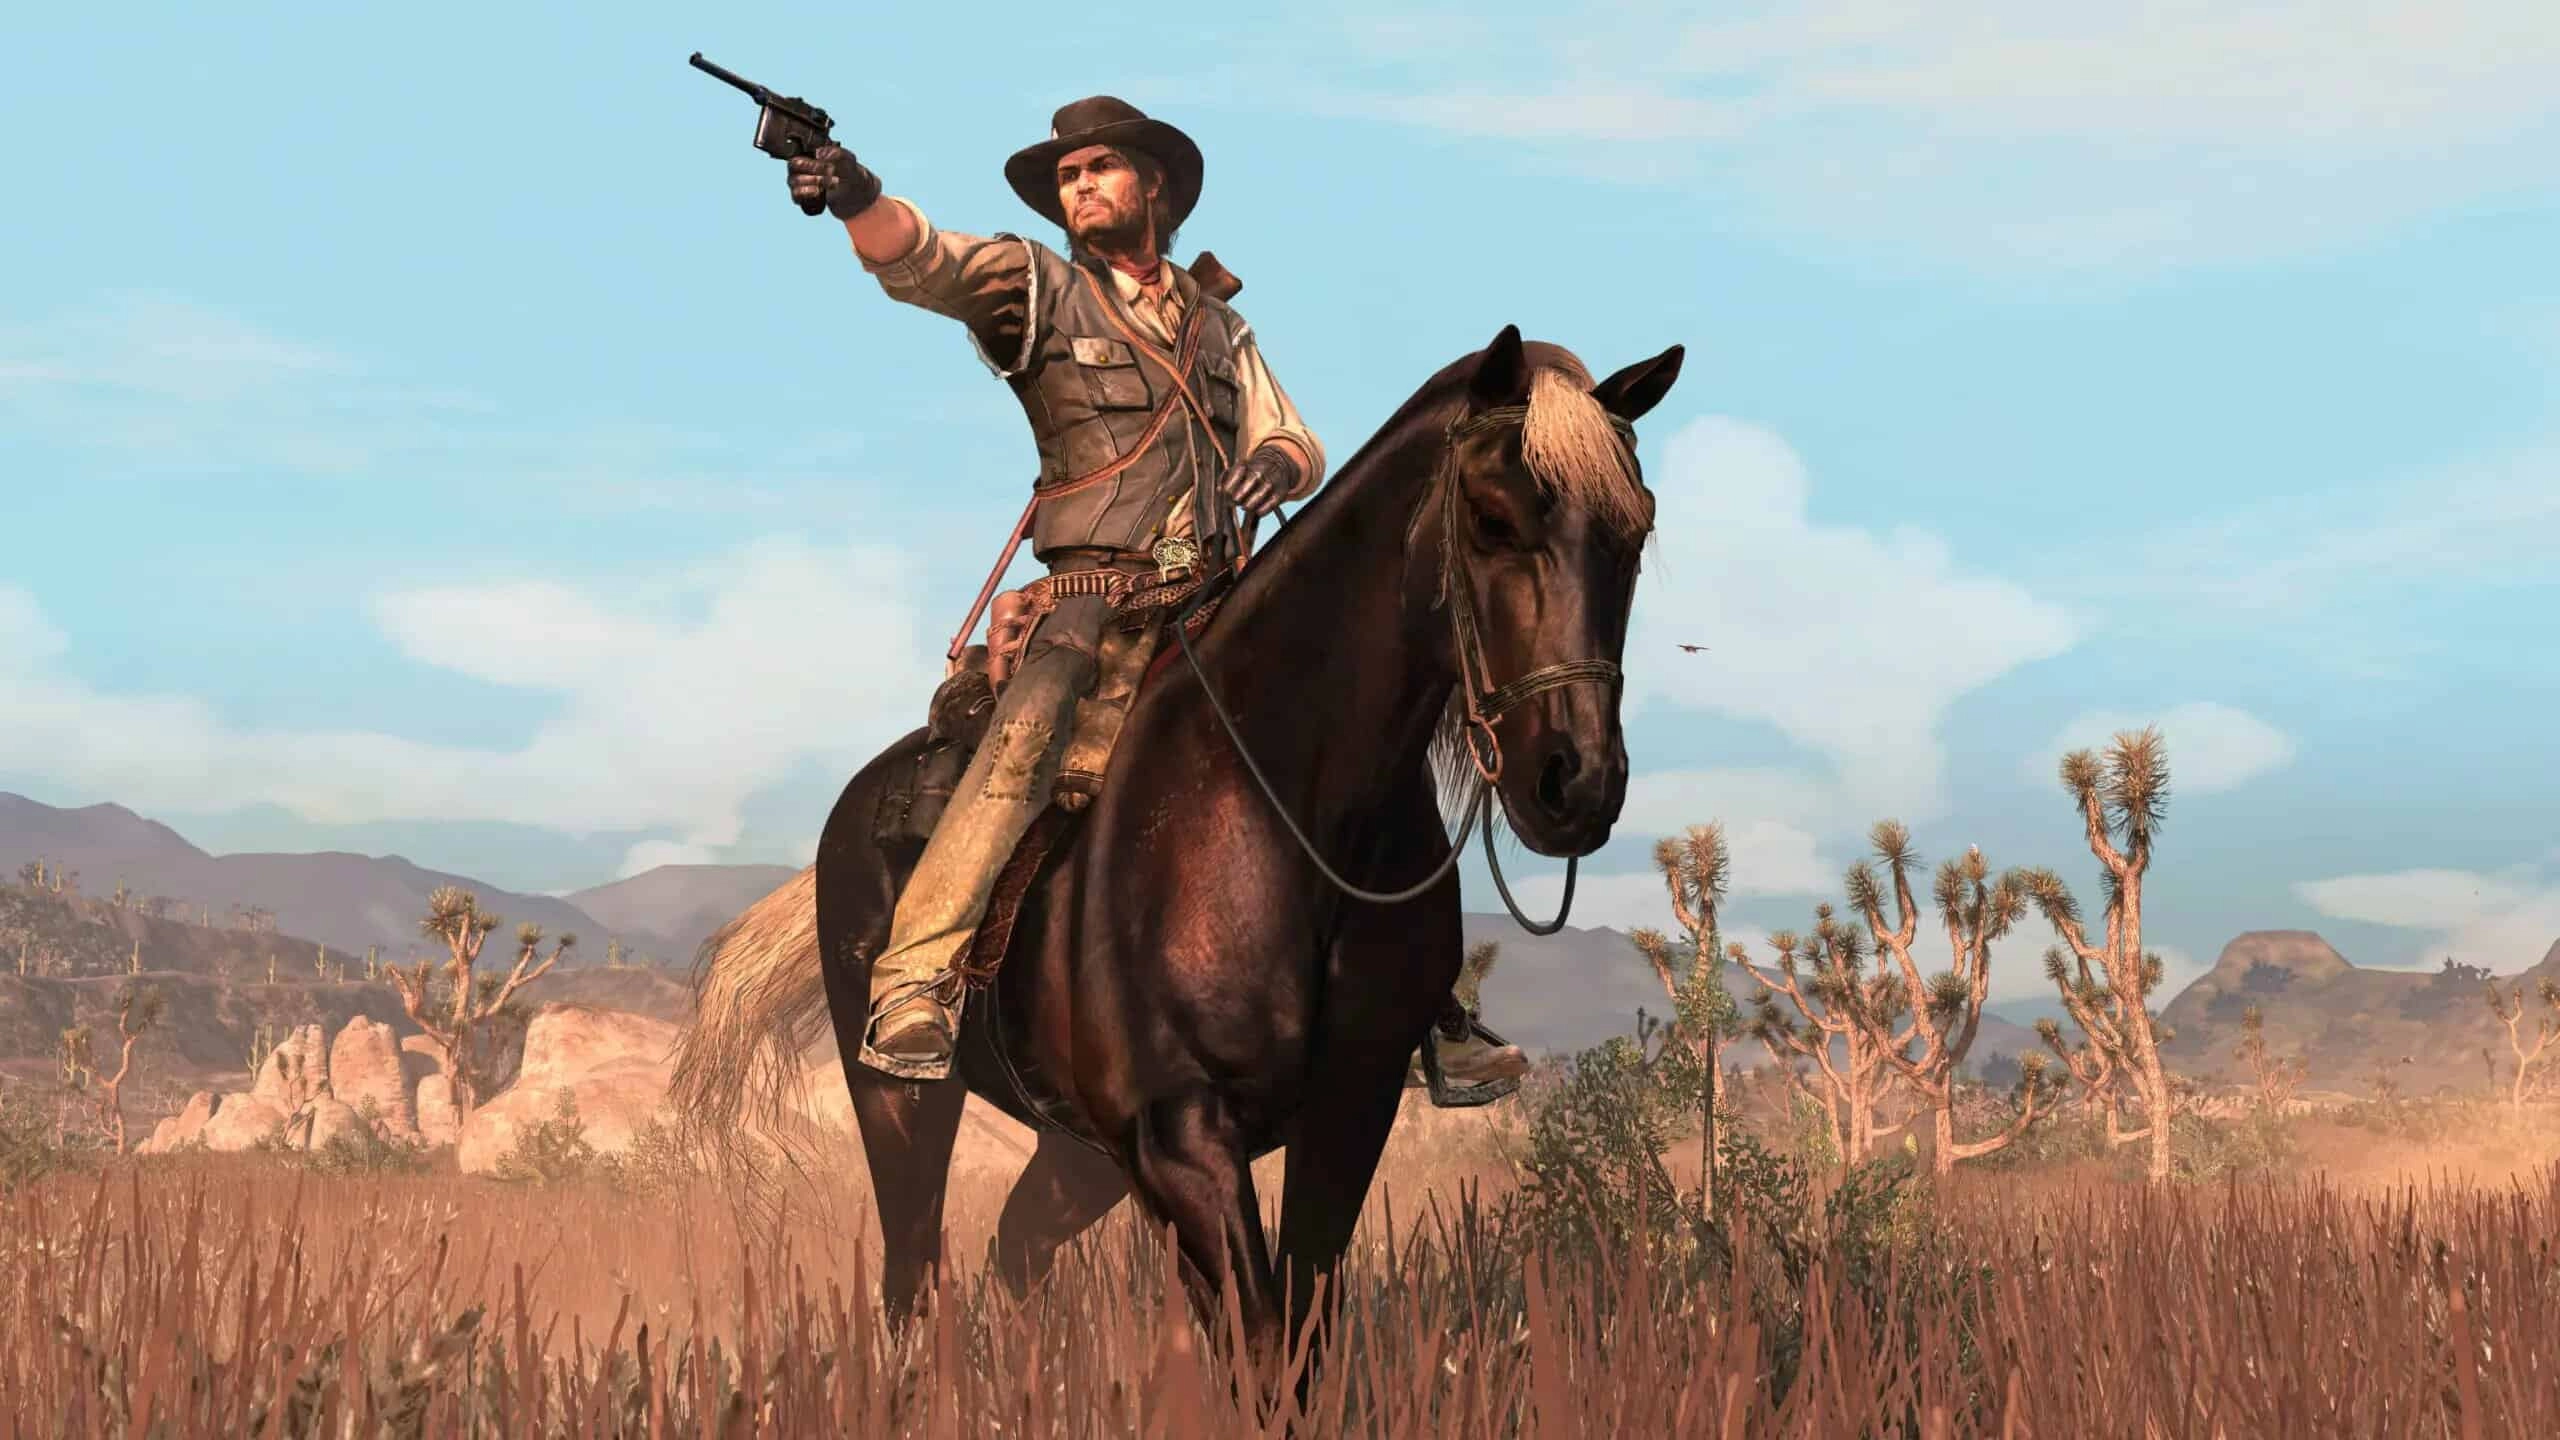 Rockstar Games Officially Reveals Red Dead Redemption For Switch & PlayStation